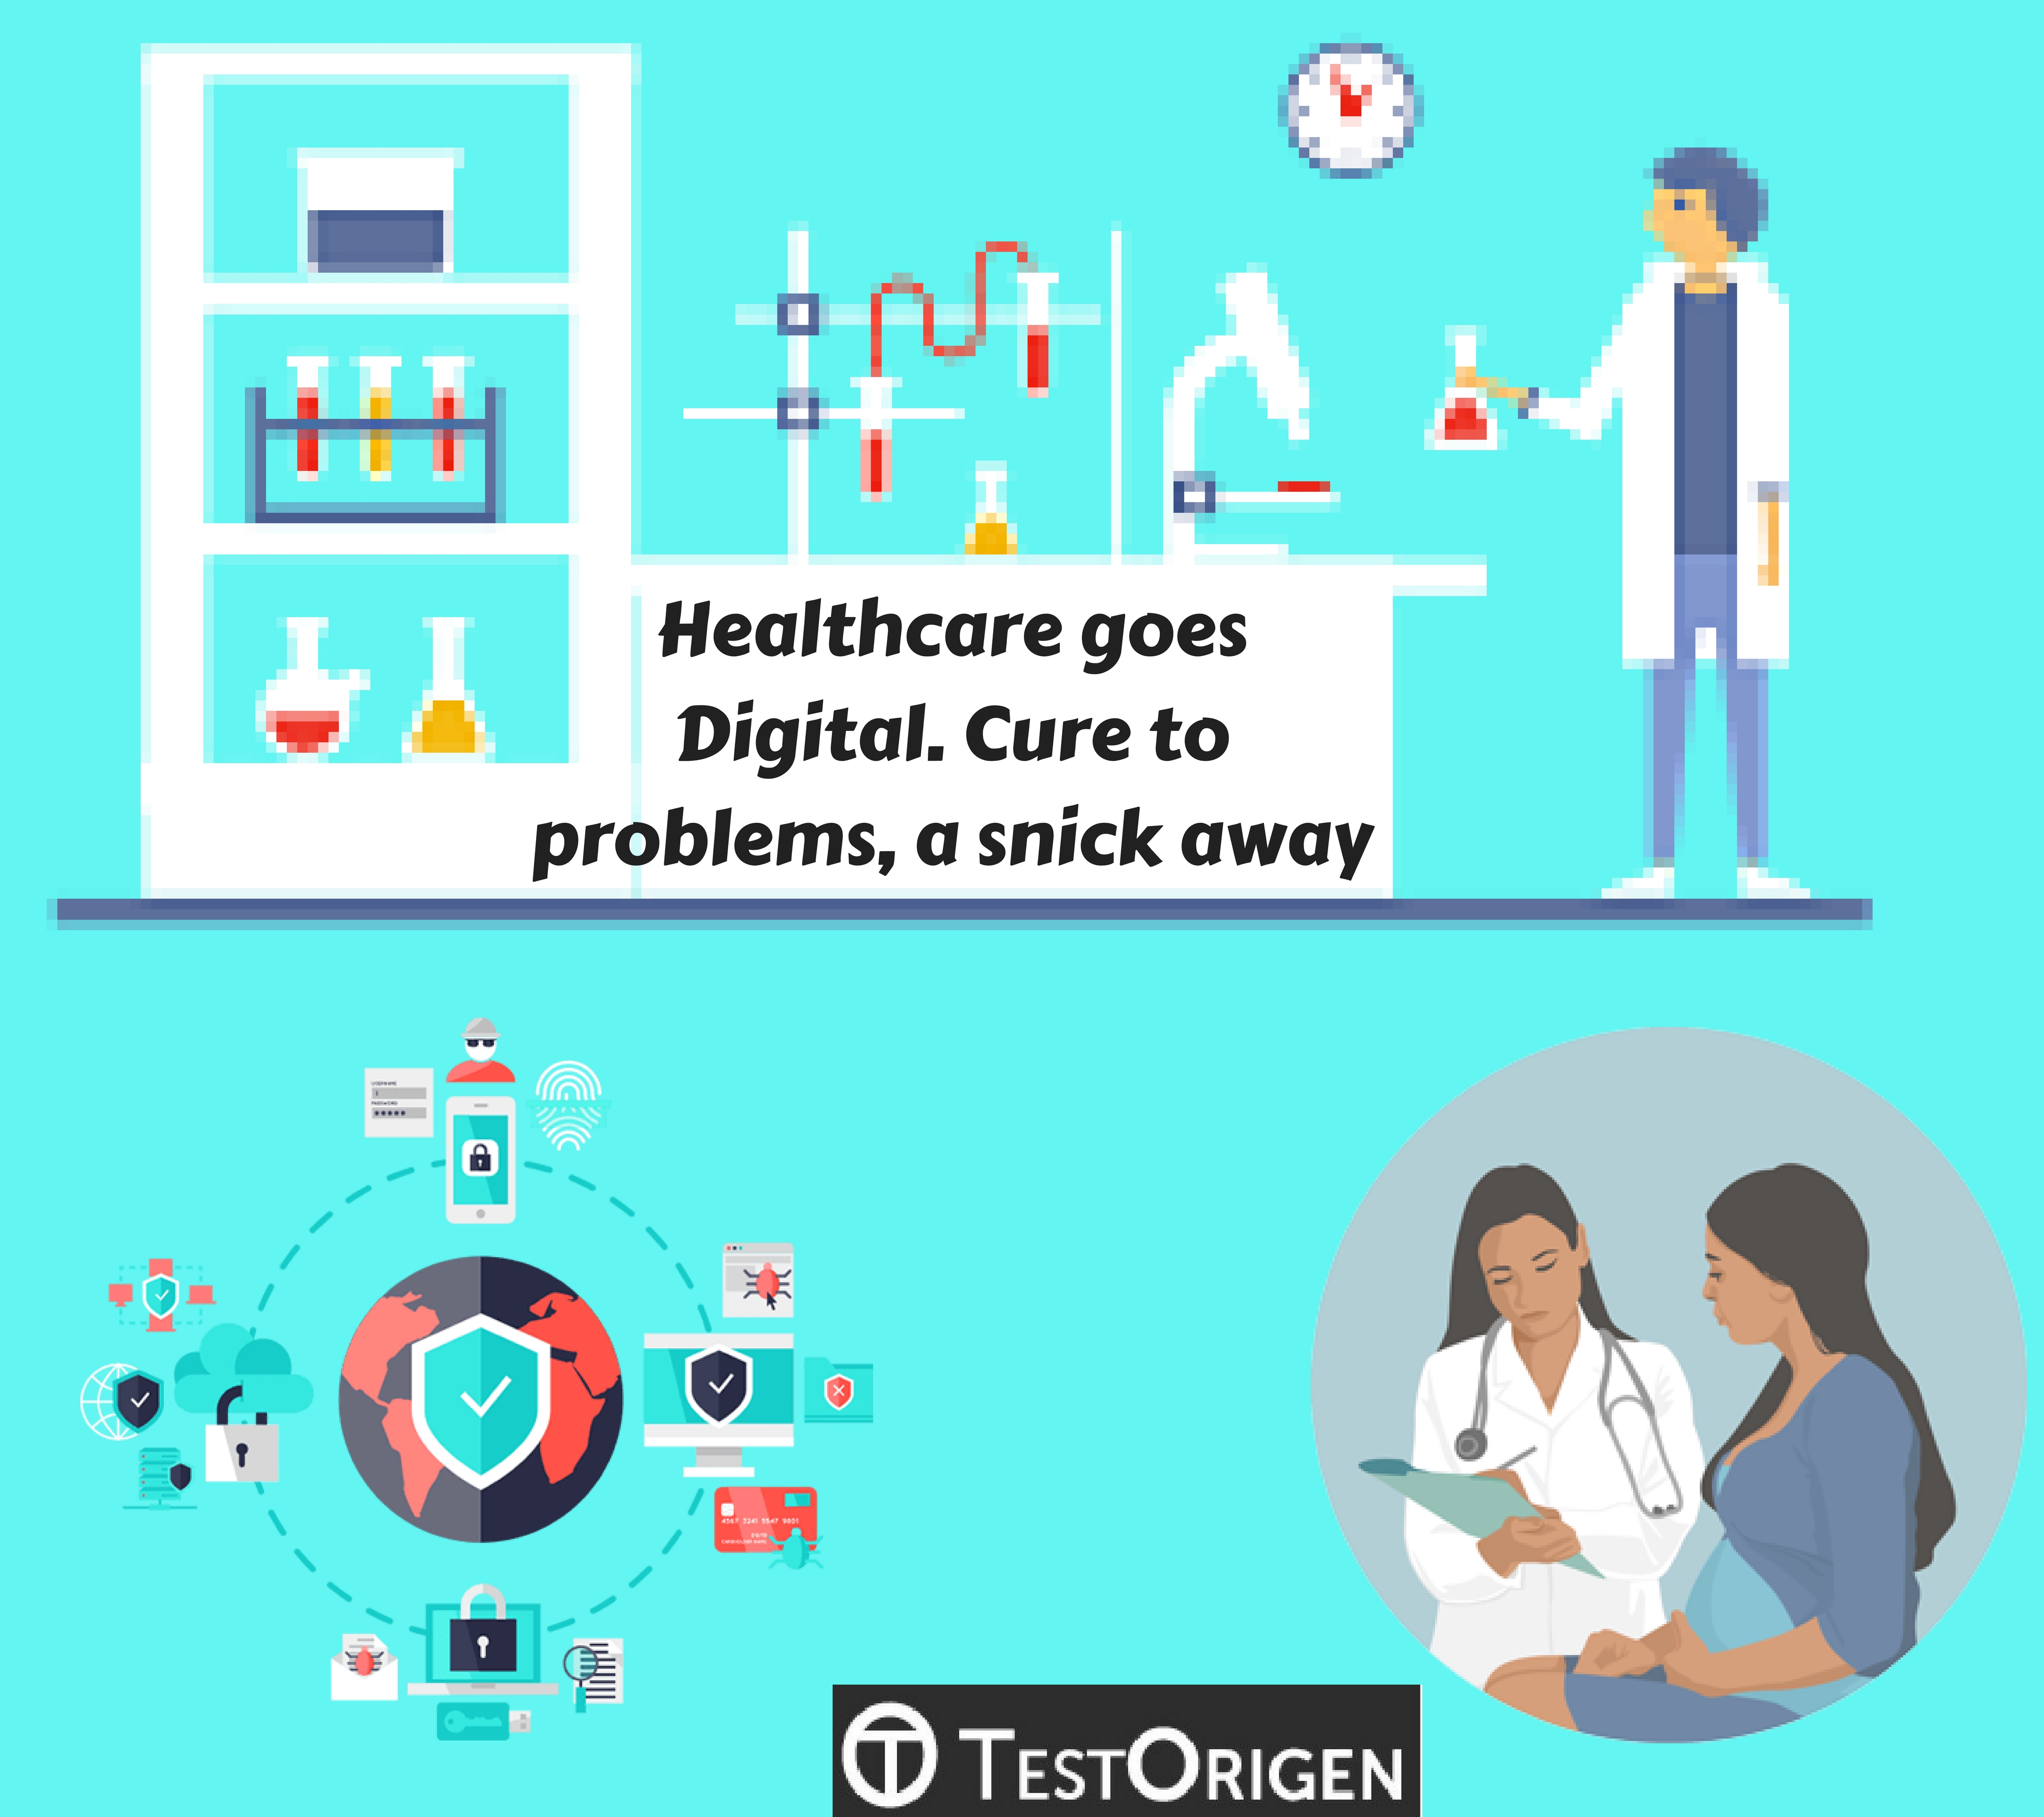 Healthcare goes Digital. Cure to problems, a snick away